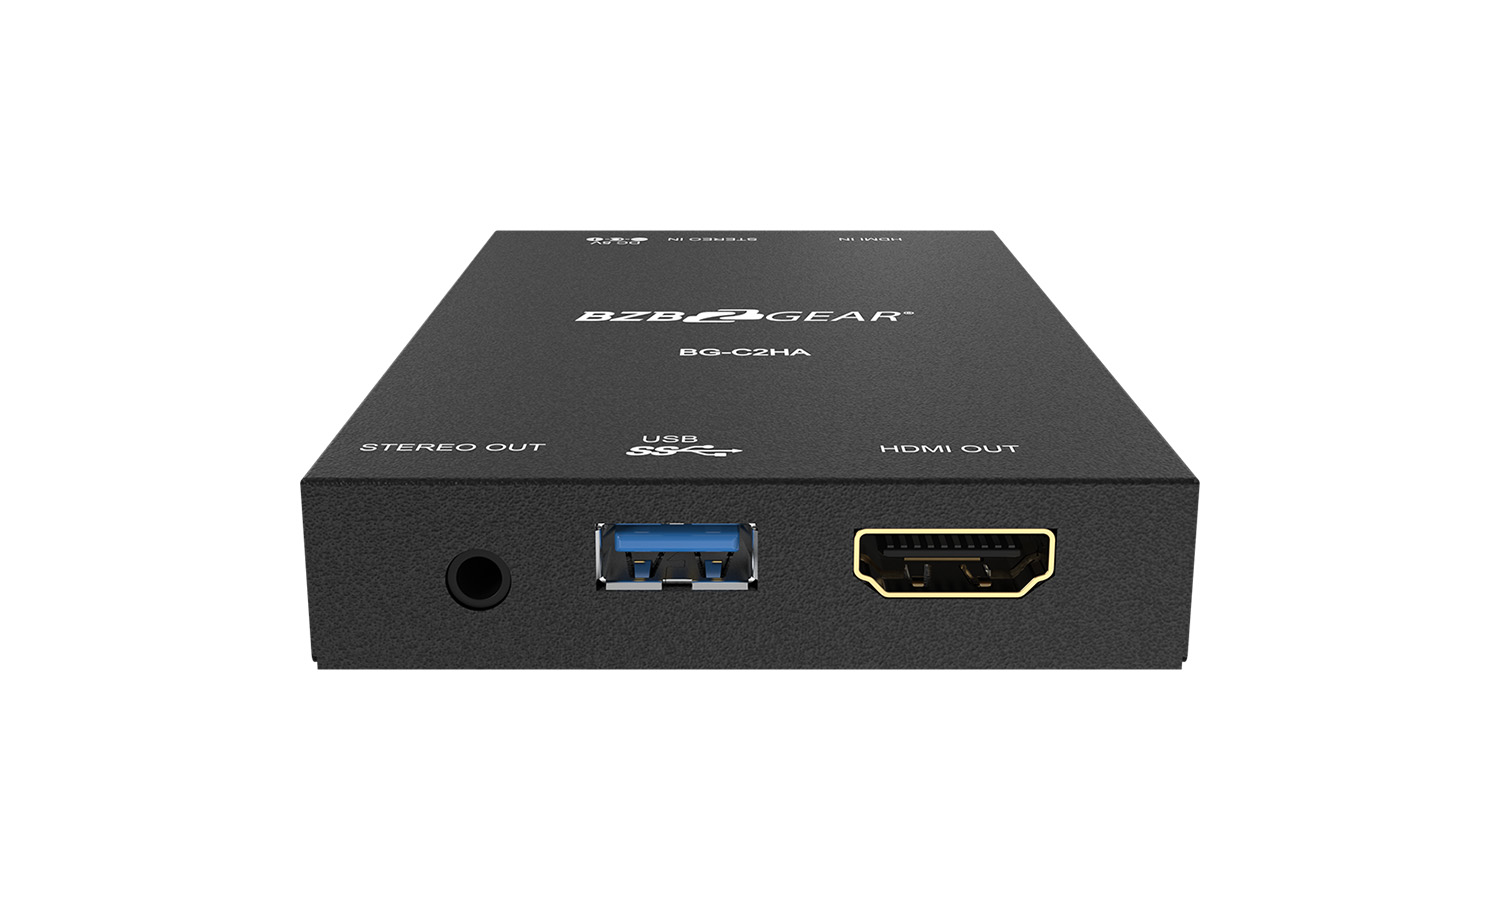 BG-C2HA 1080P Full HD USB 3.0 Full HD Video Capture Device/Box with HDMI 2.0 Loop-Out and Audio by BZBGEAR